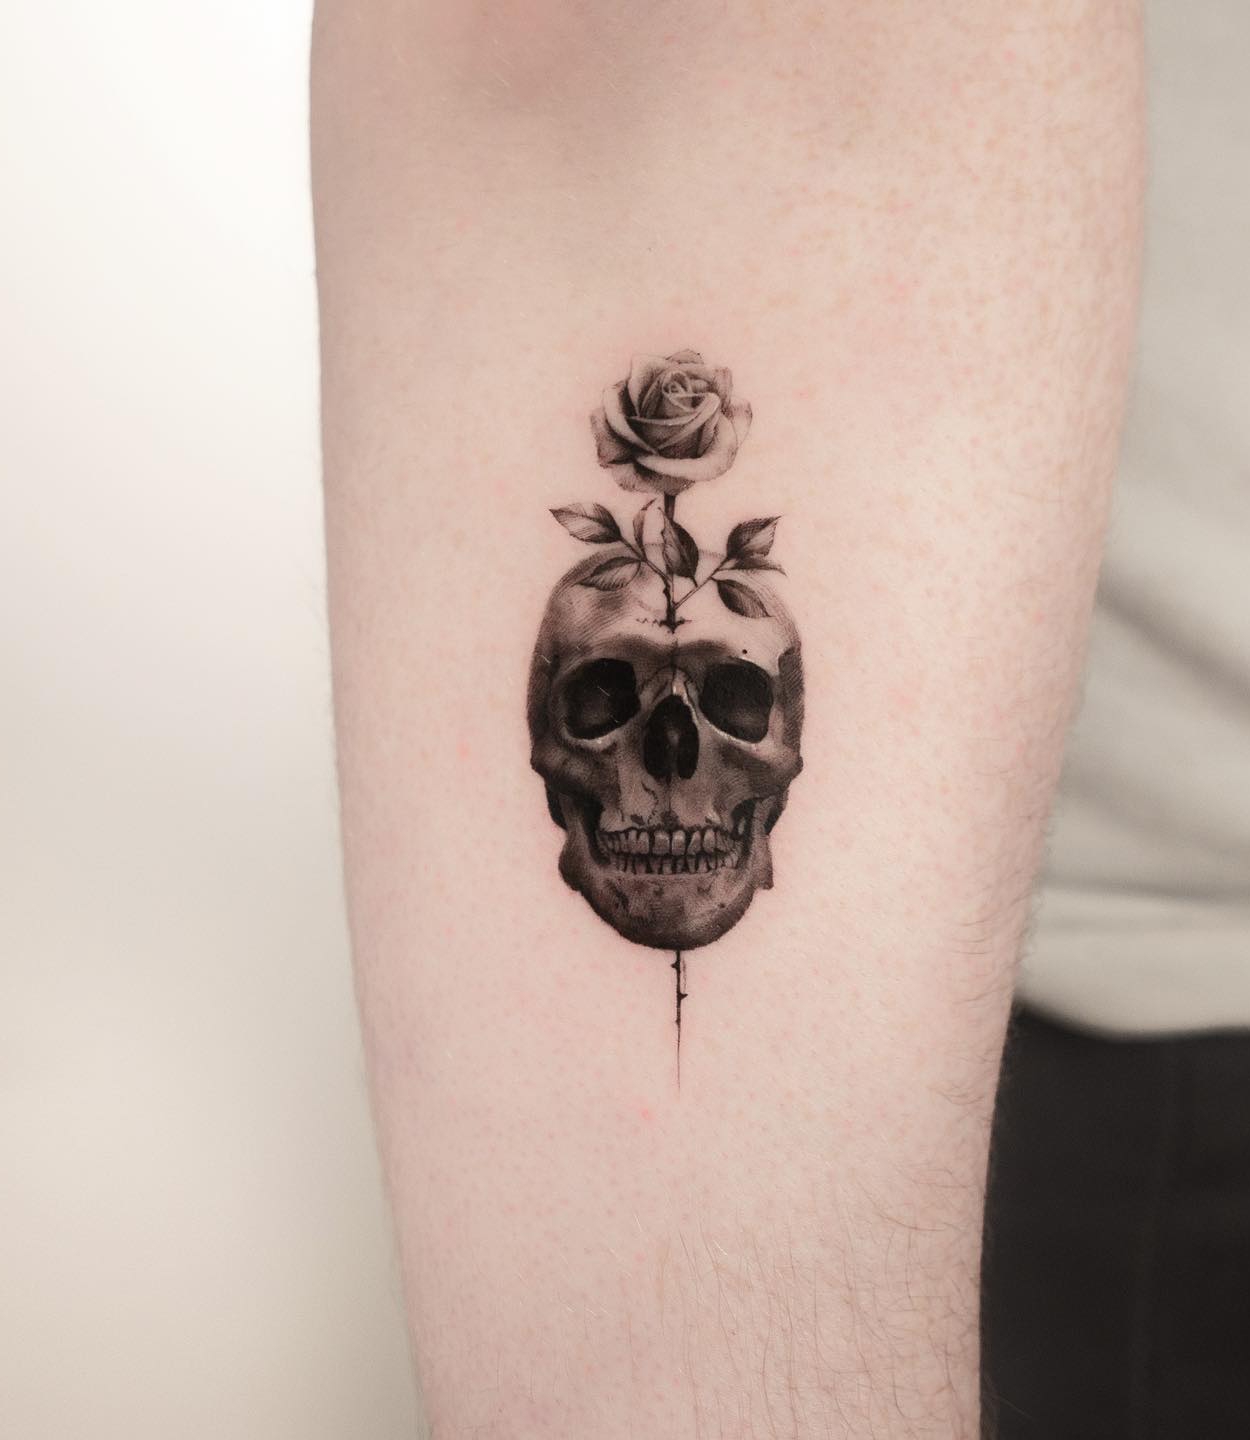 Skull and Rose Tattoo on Arm